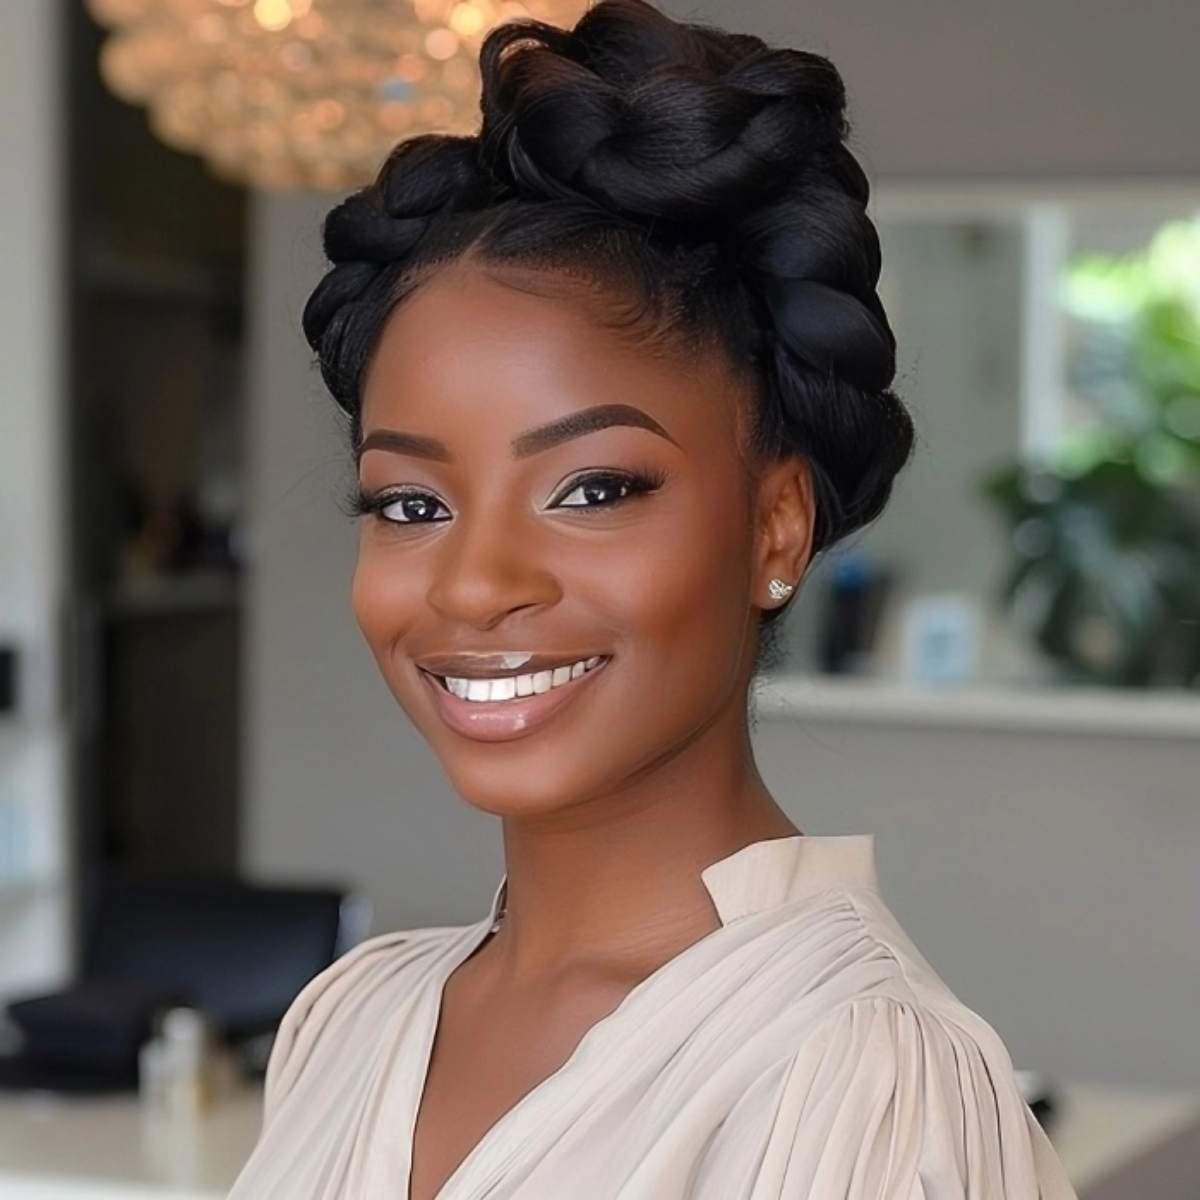 Knotted Updo Hairstyle for African-American Ladies